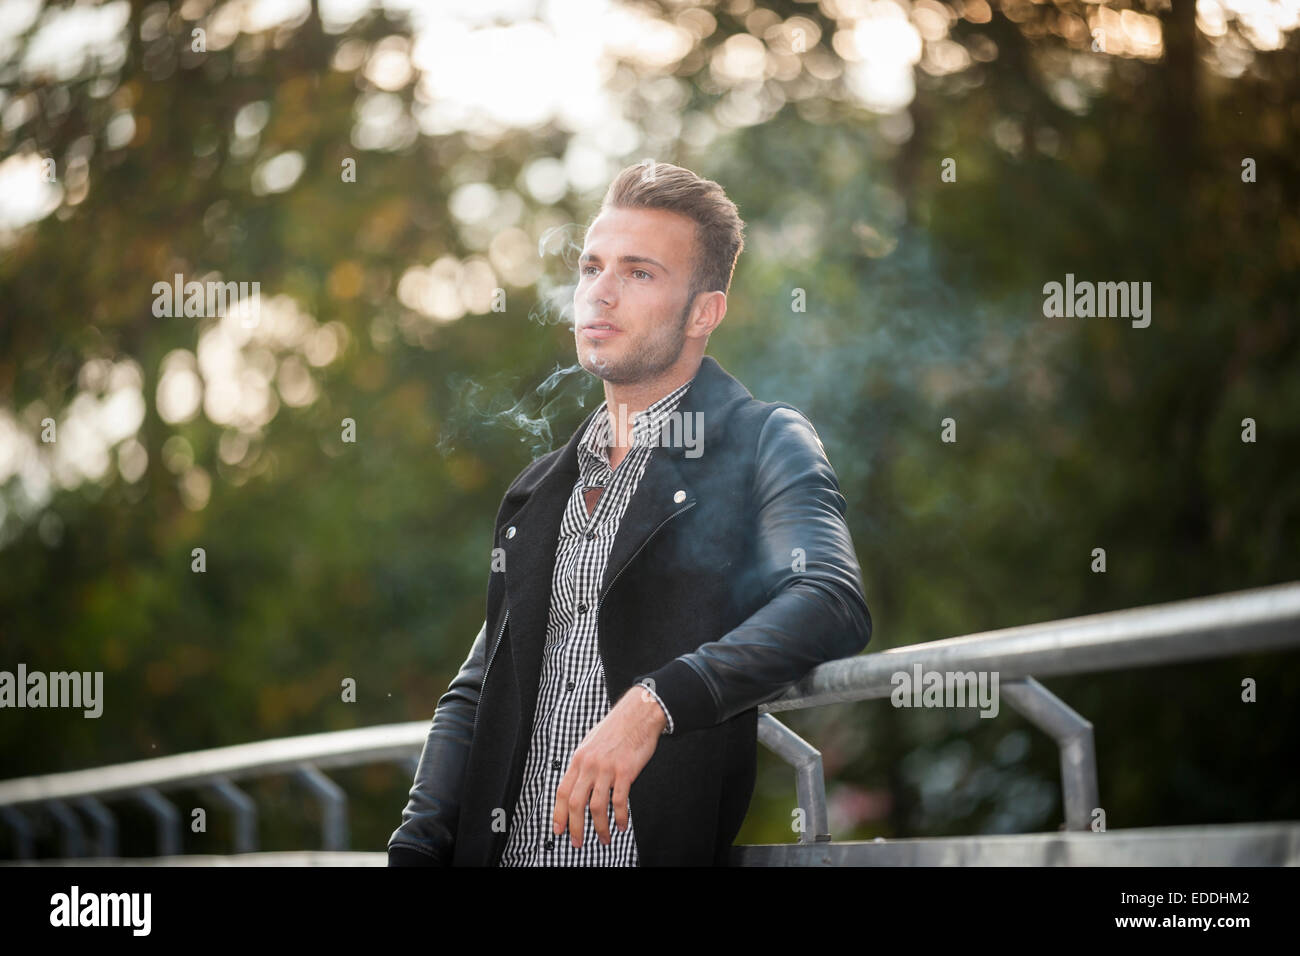 Portrait of young man smoking a cigarette Stock Photo